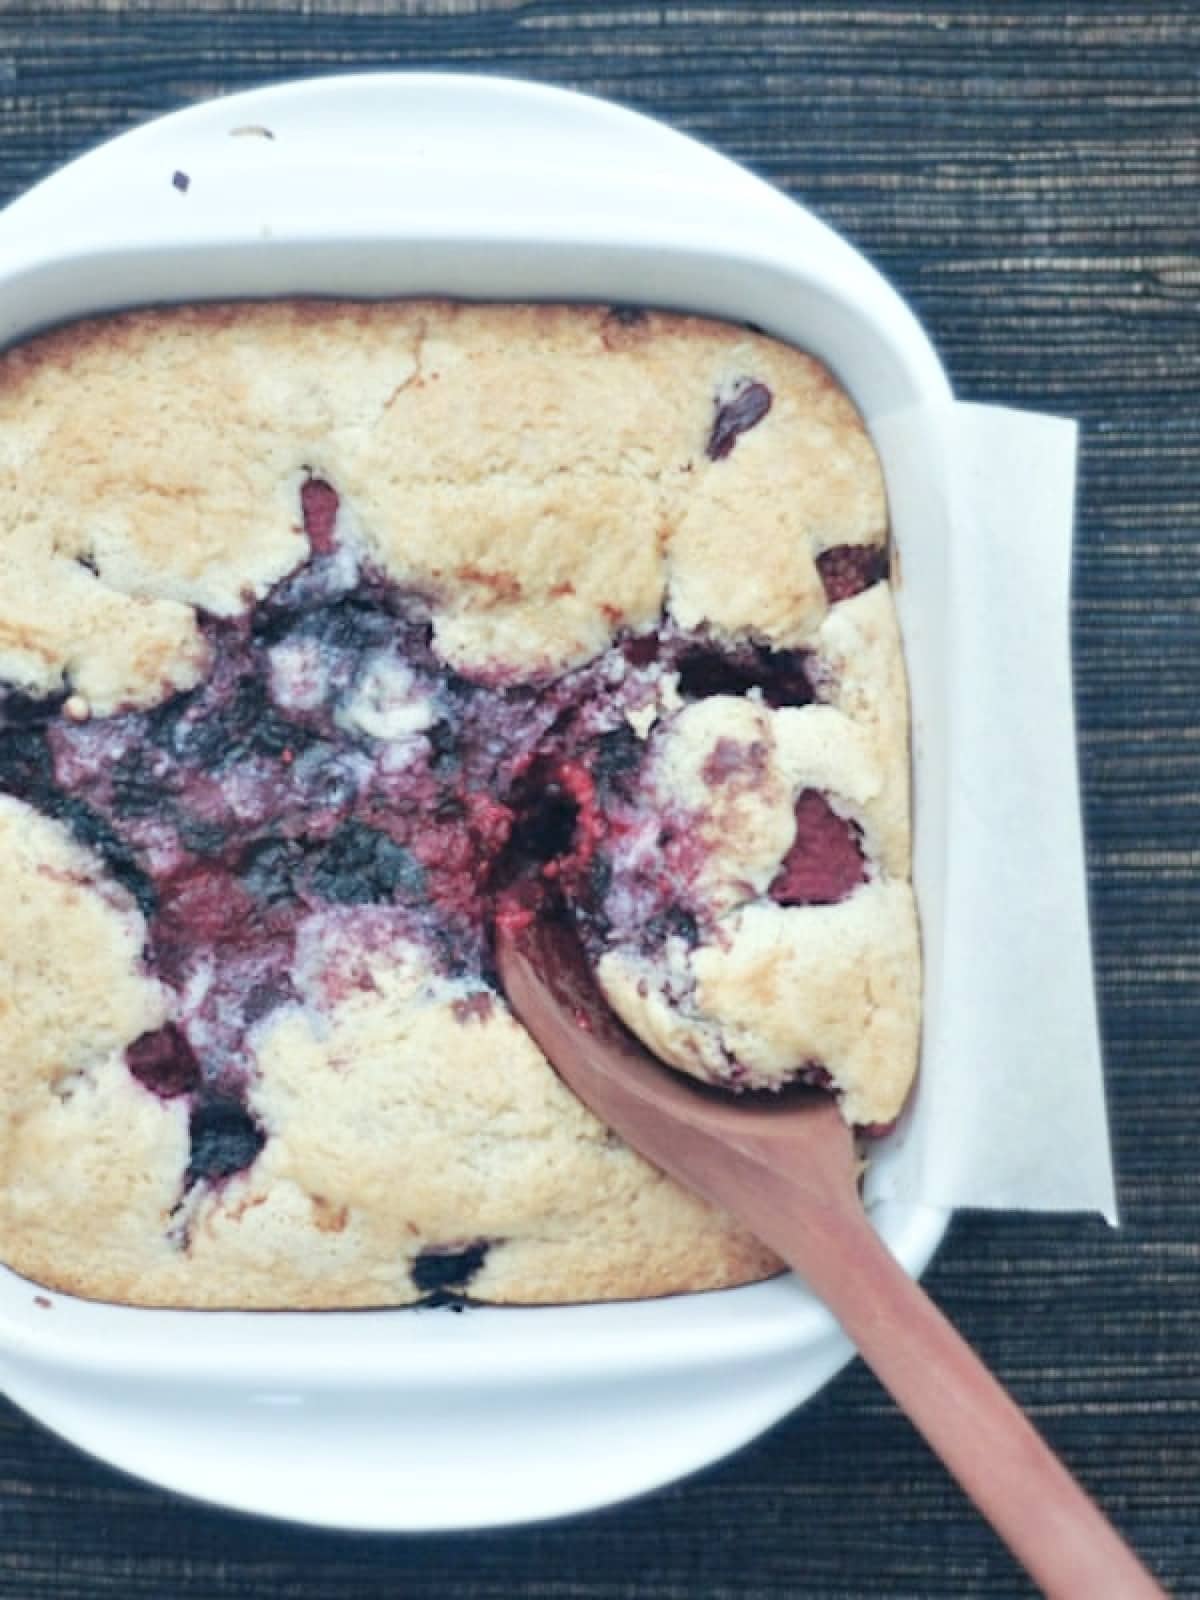 Overhead view of white square baking dish of mixed berry cobbler with a wooden spoon digging into it.